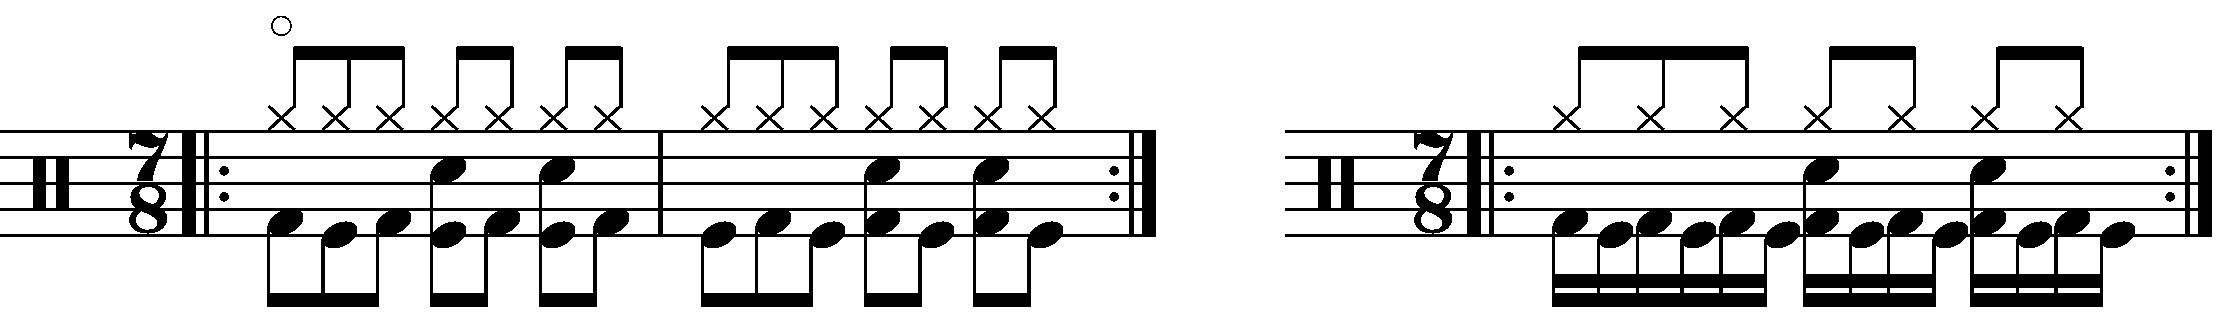 Constant note values in double kick.